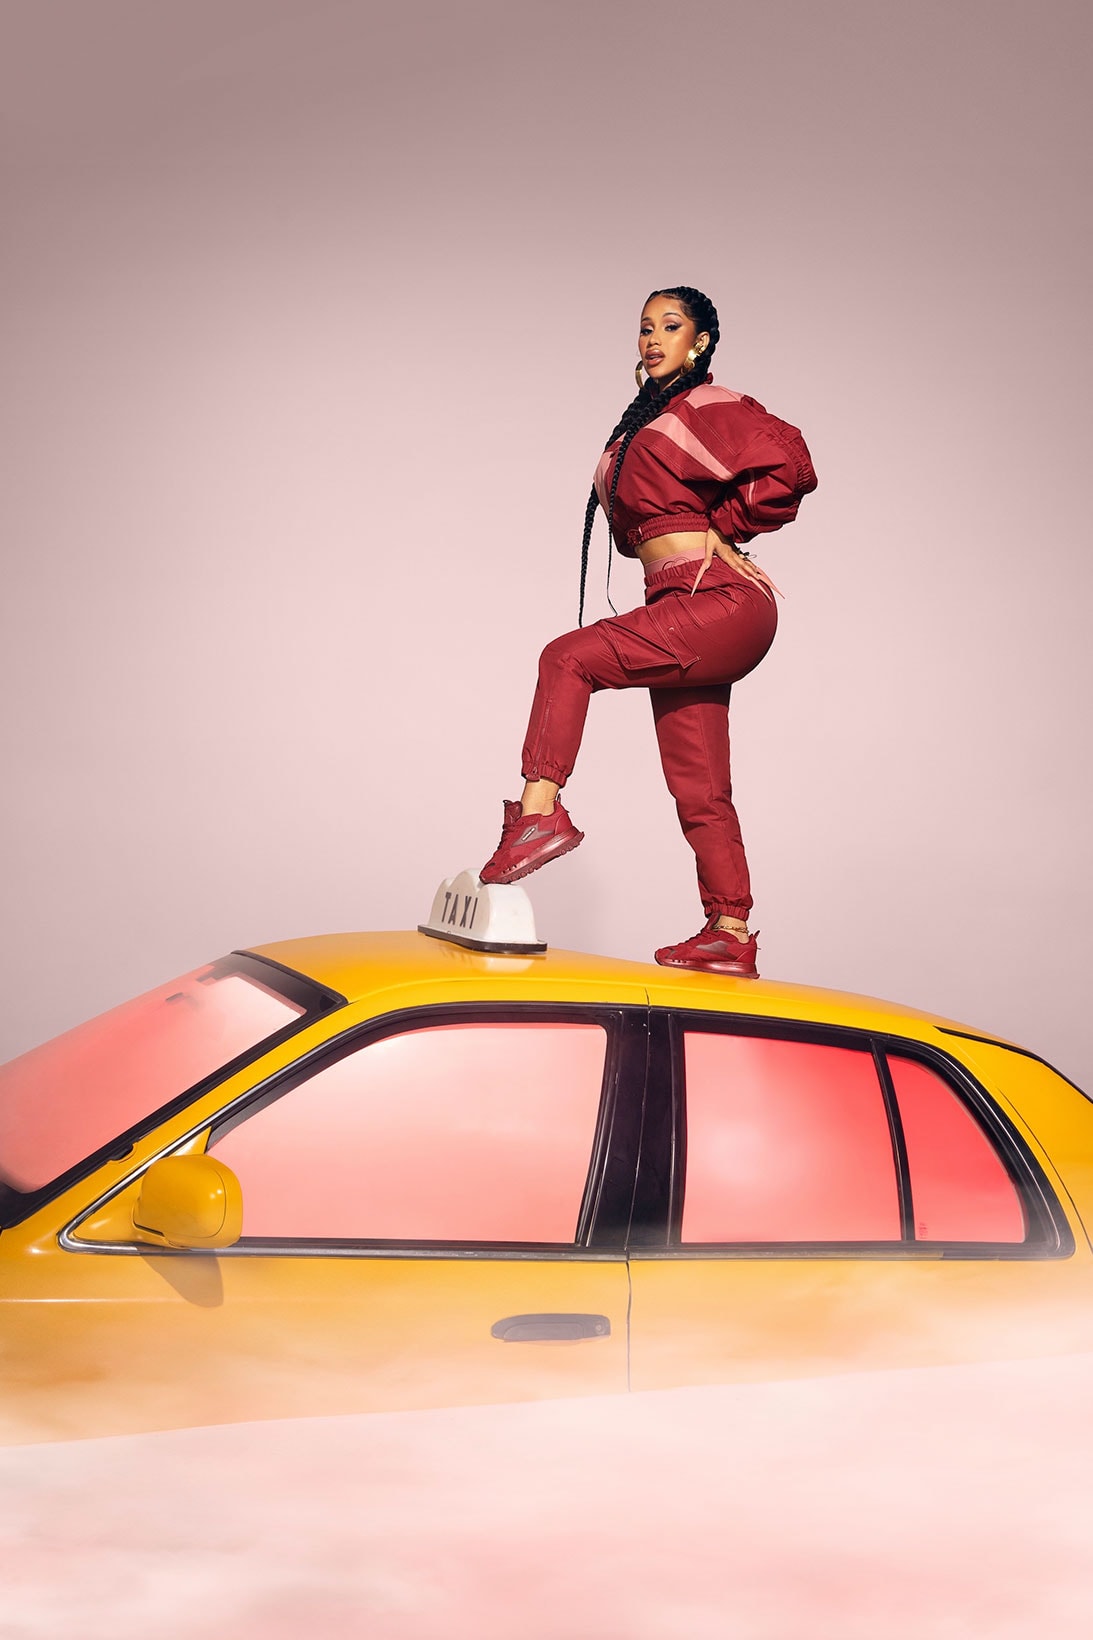 Cardi B Reebok Collaboration Apparel Sneakers NYC Classic Leather Red Pink Tracksuit Crop